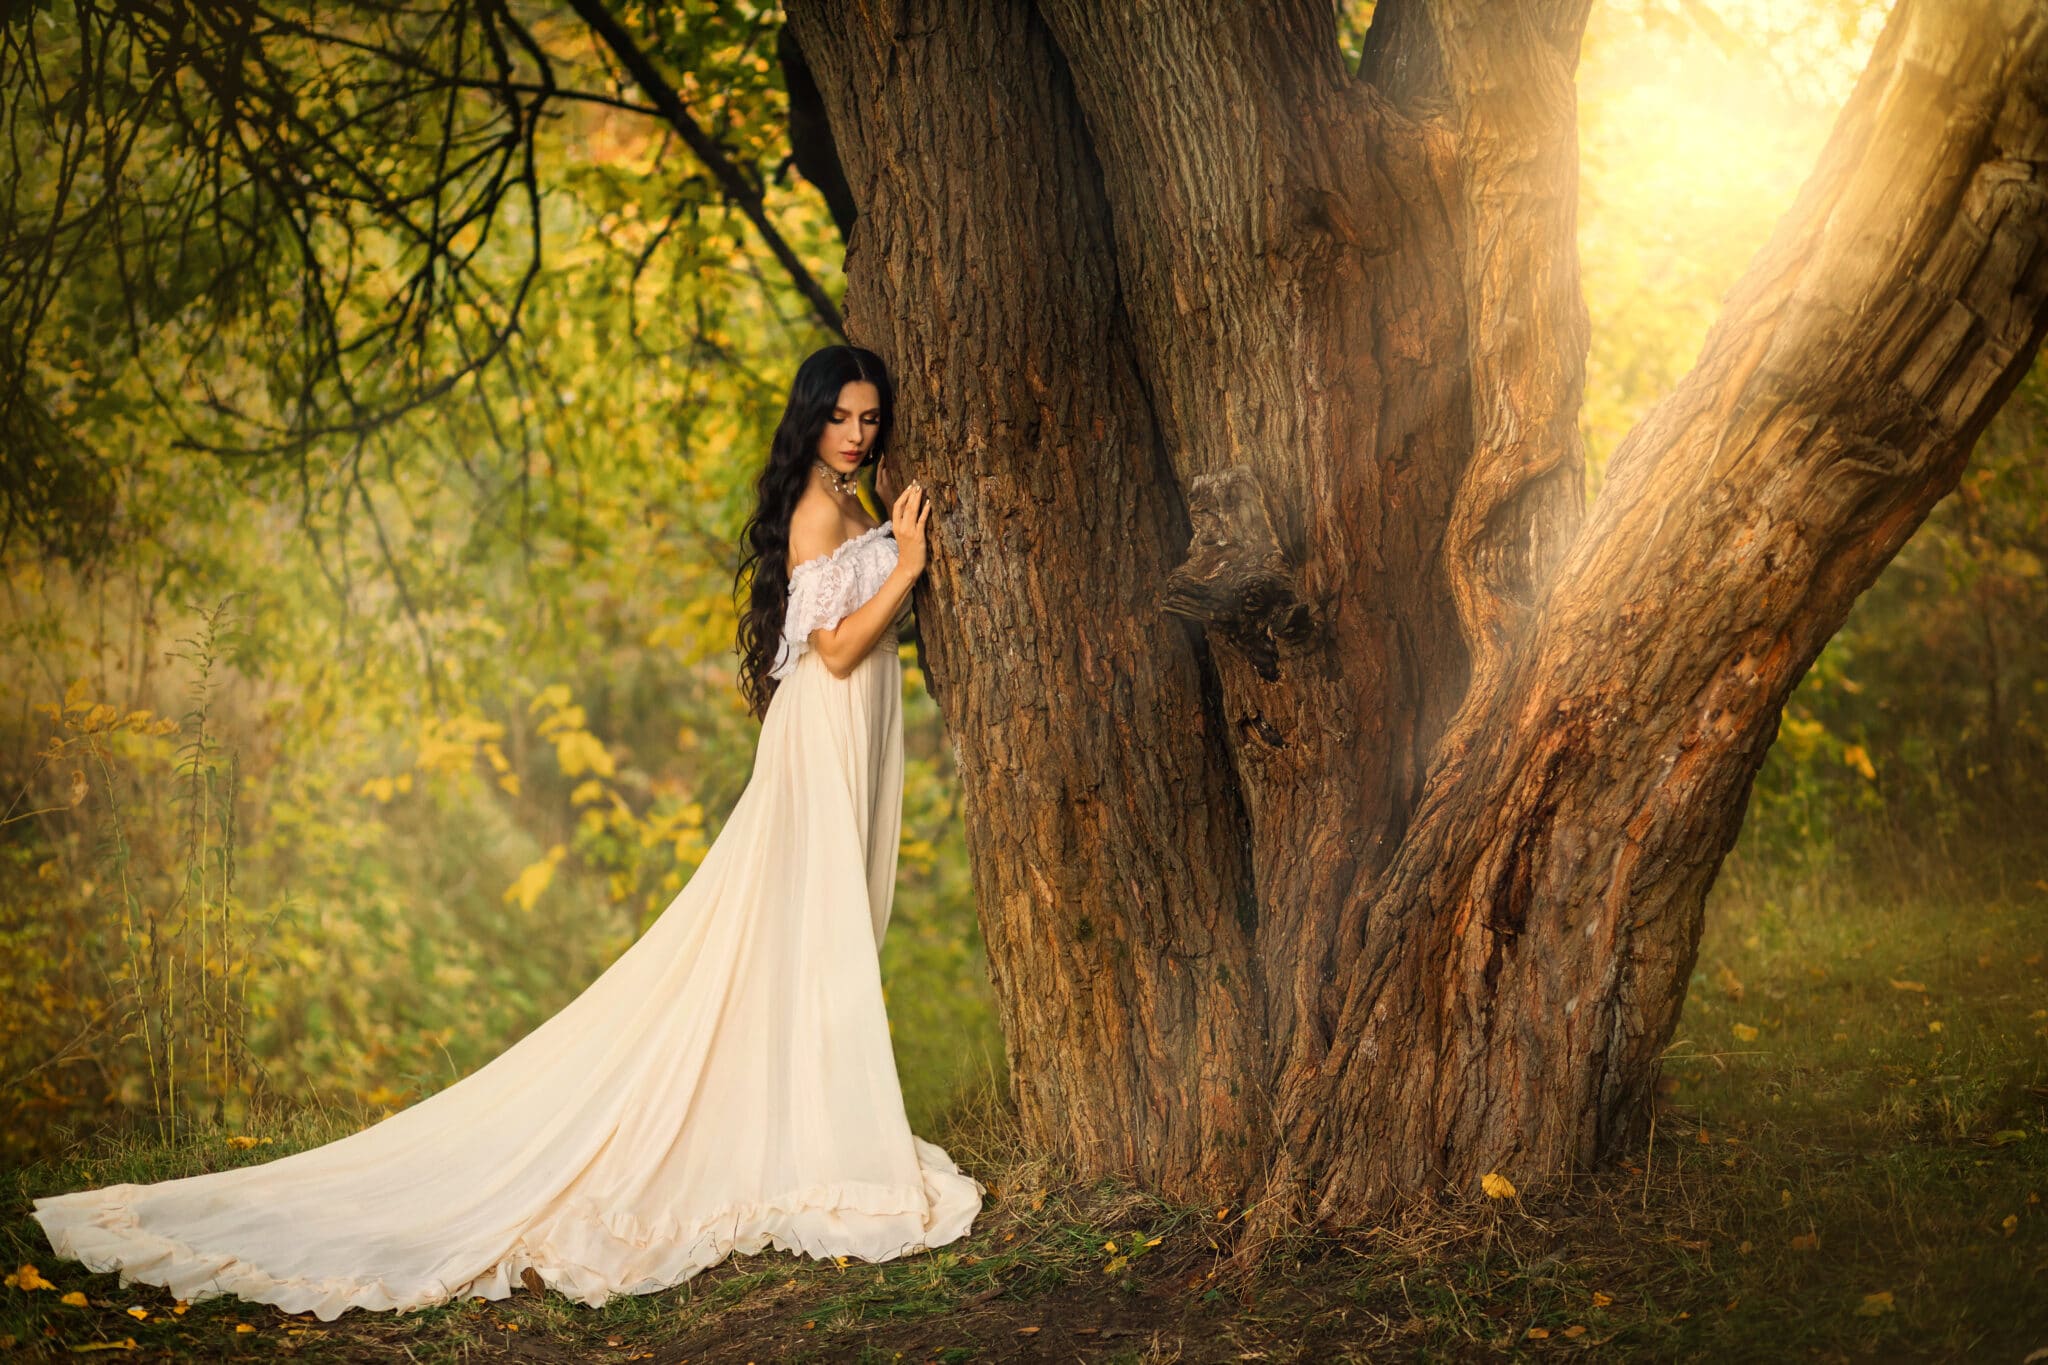 a fantasy woman in white vintage dress, walking in summer forest hand touching tree